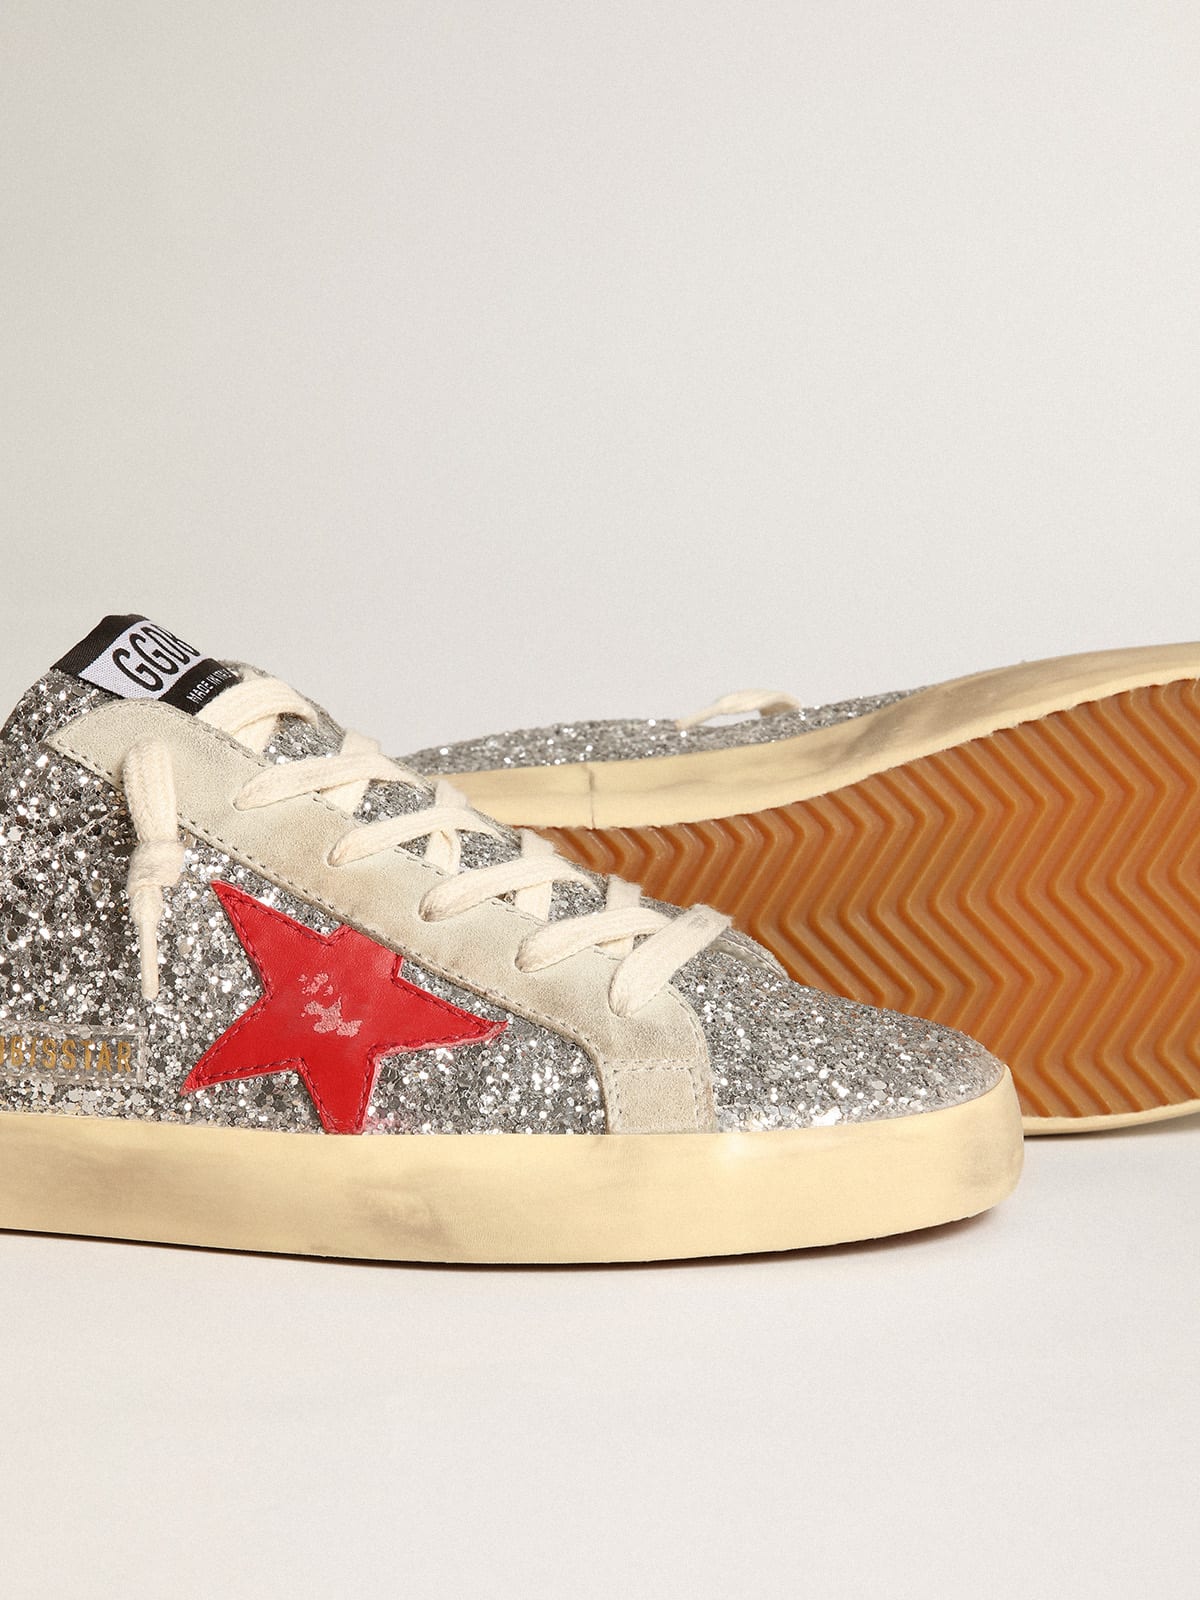 Golden Goose - Super-Star Sabots in silver glitter with red leather star in 